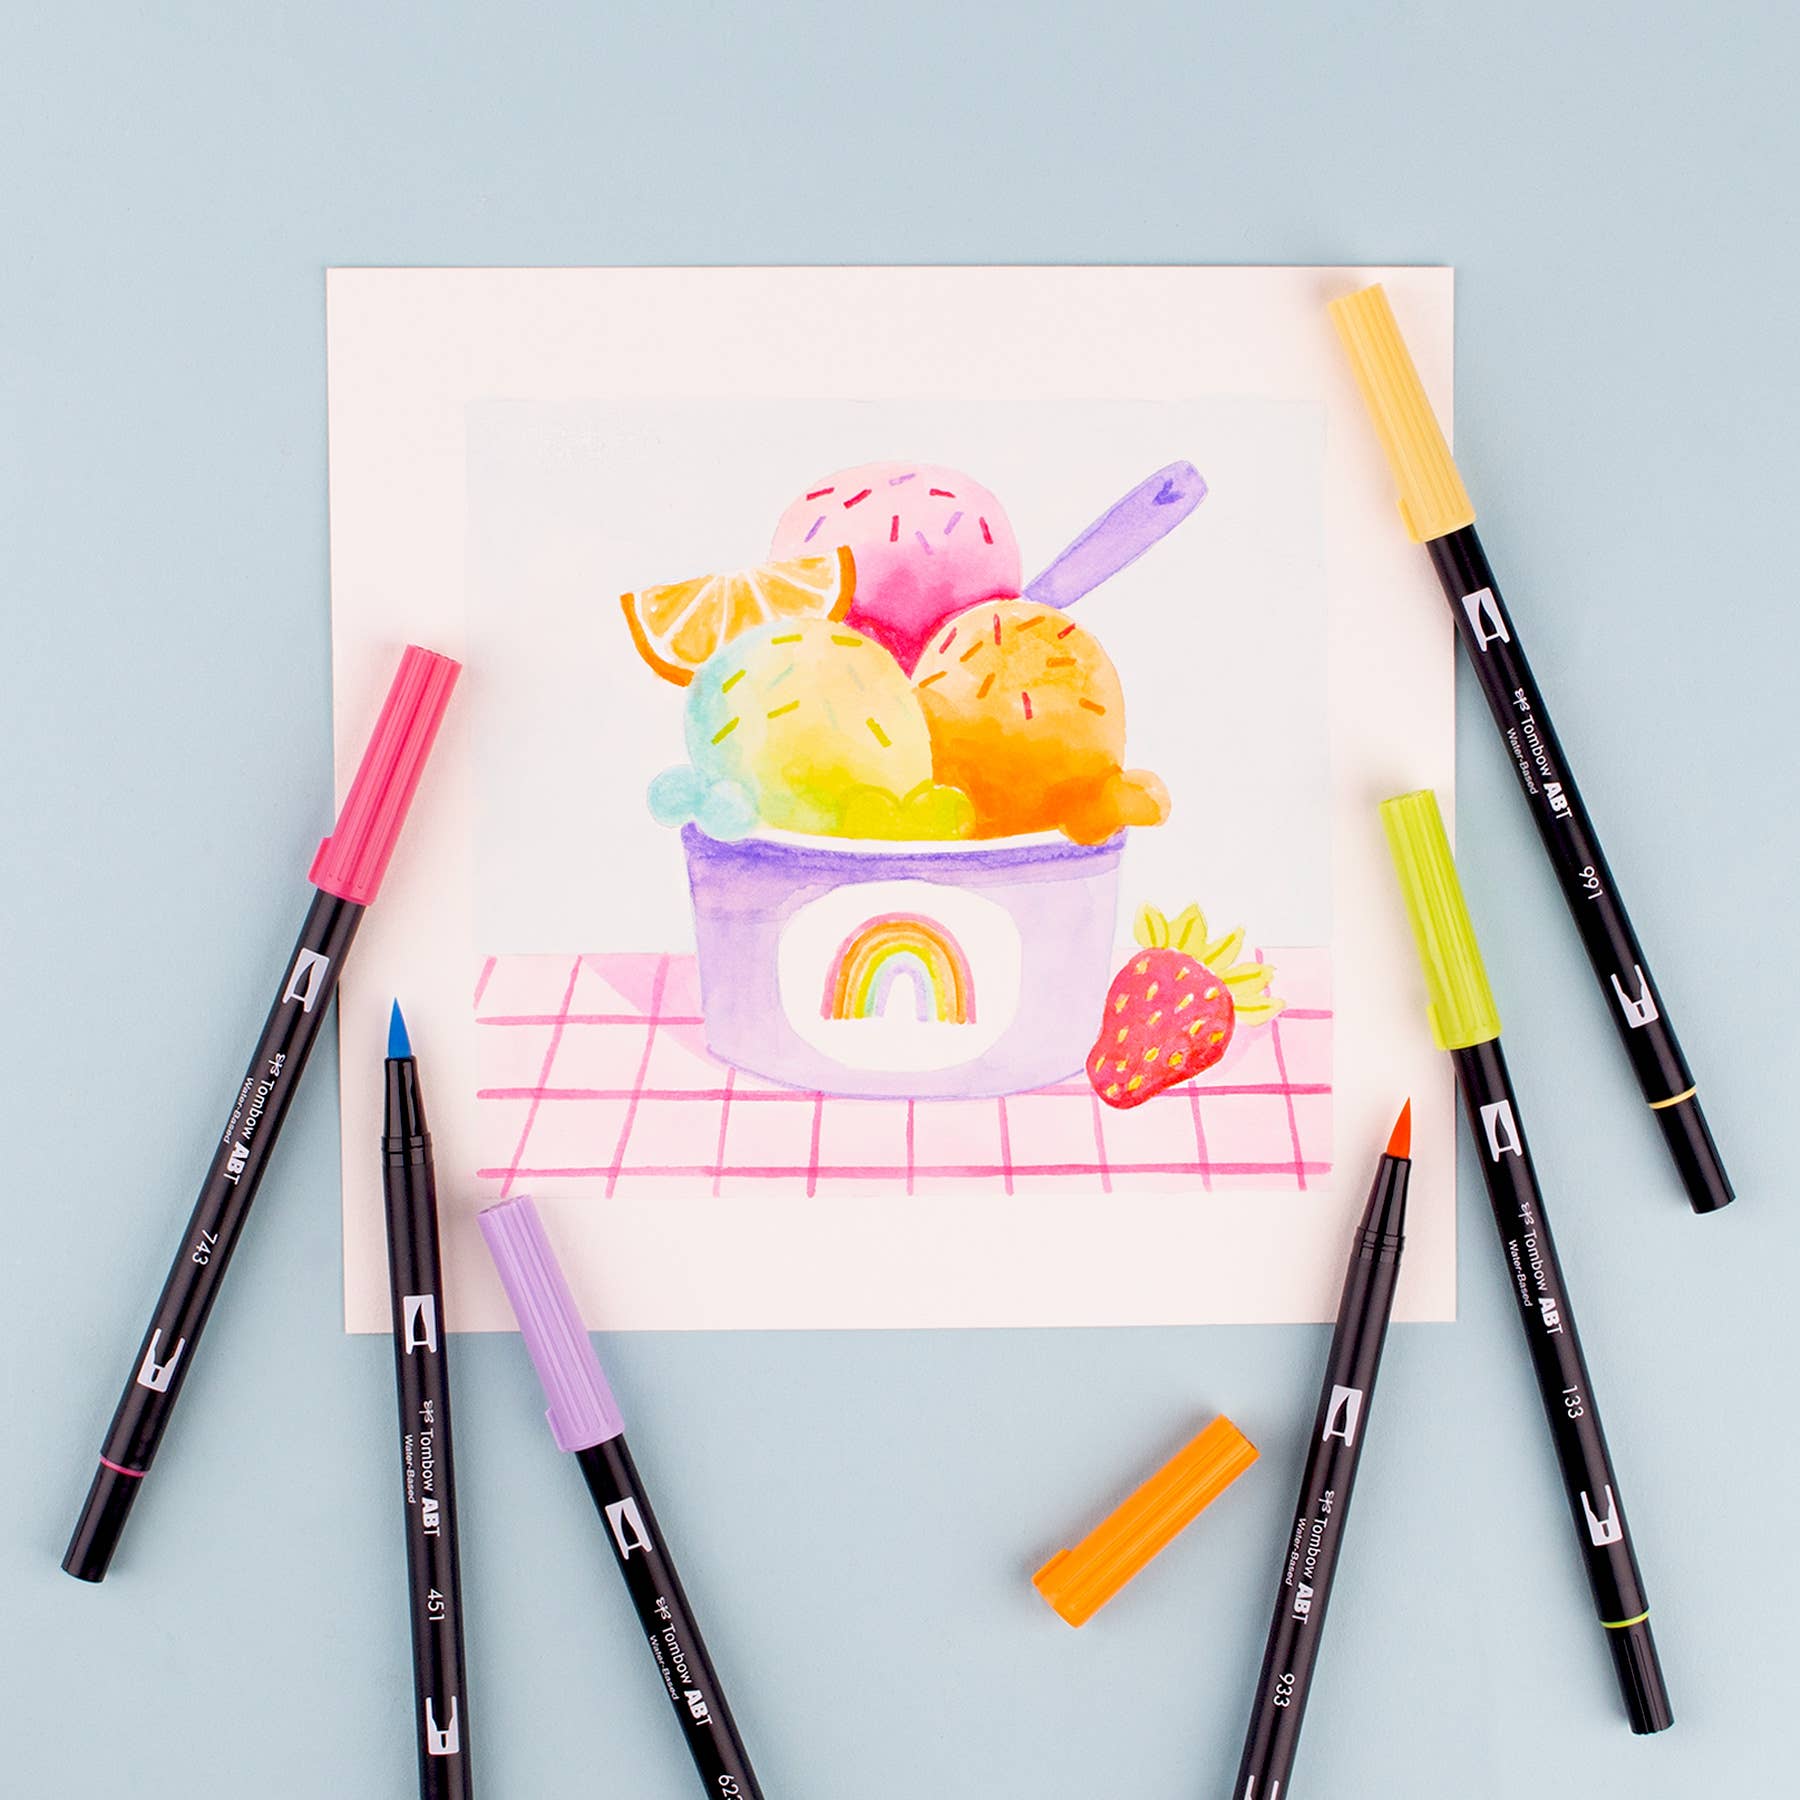 Yay Sorbet - Tombow - Dual Brush Pen Art Markers, 6-Pack